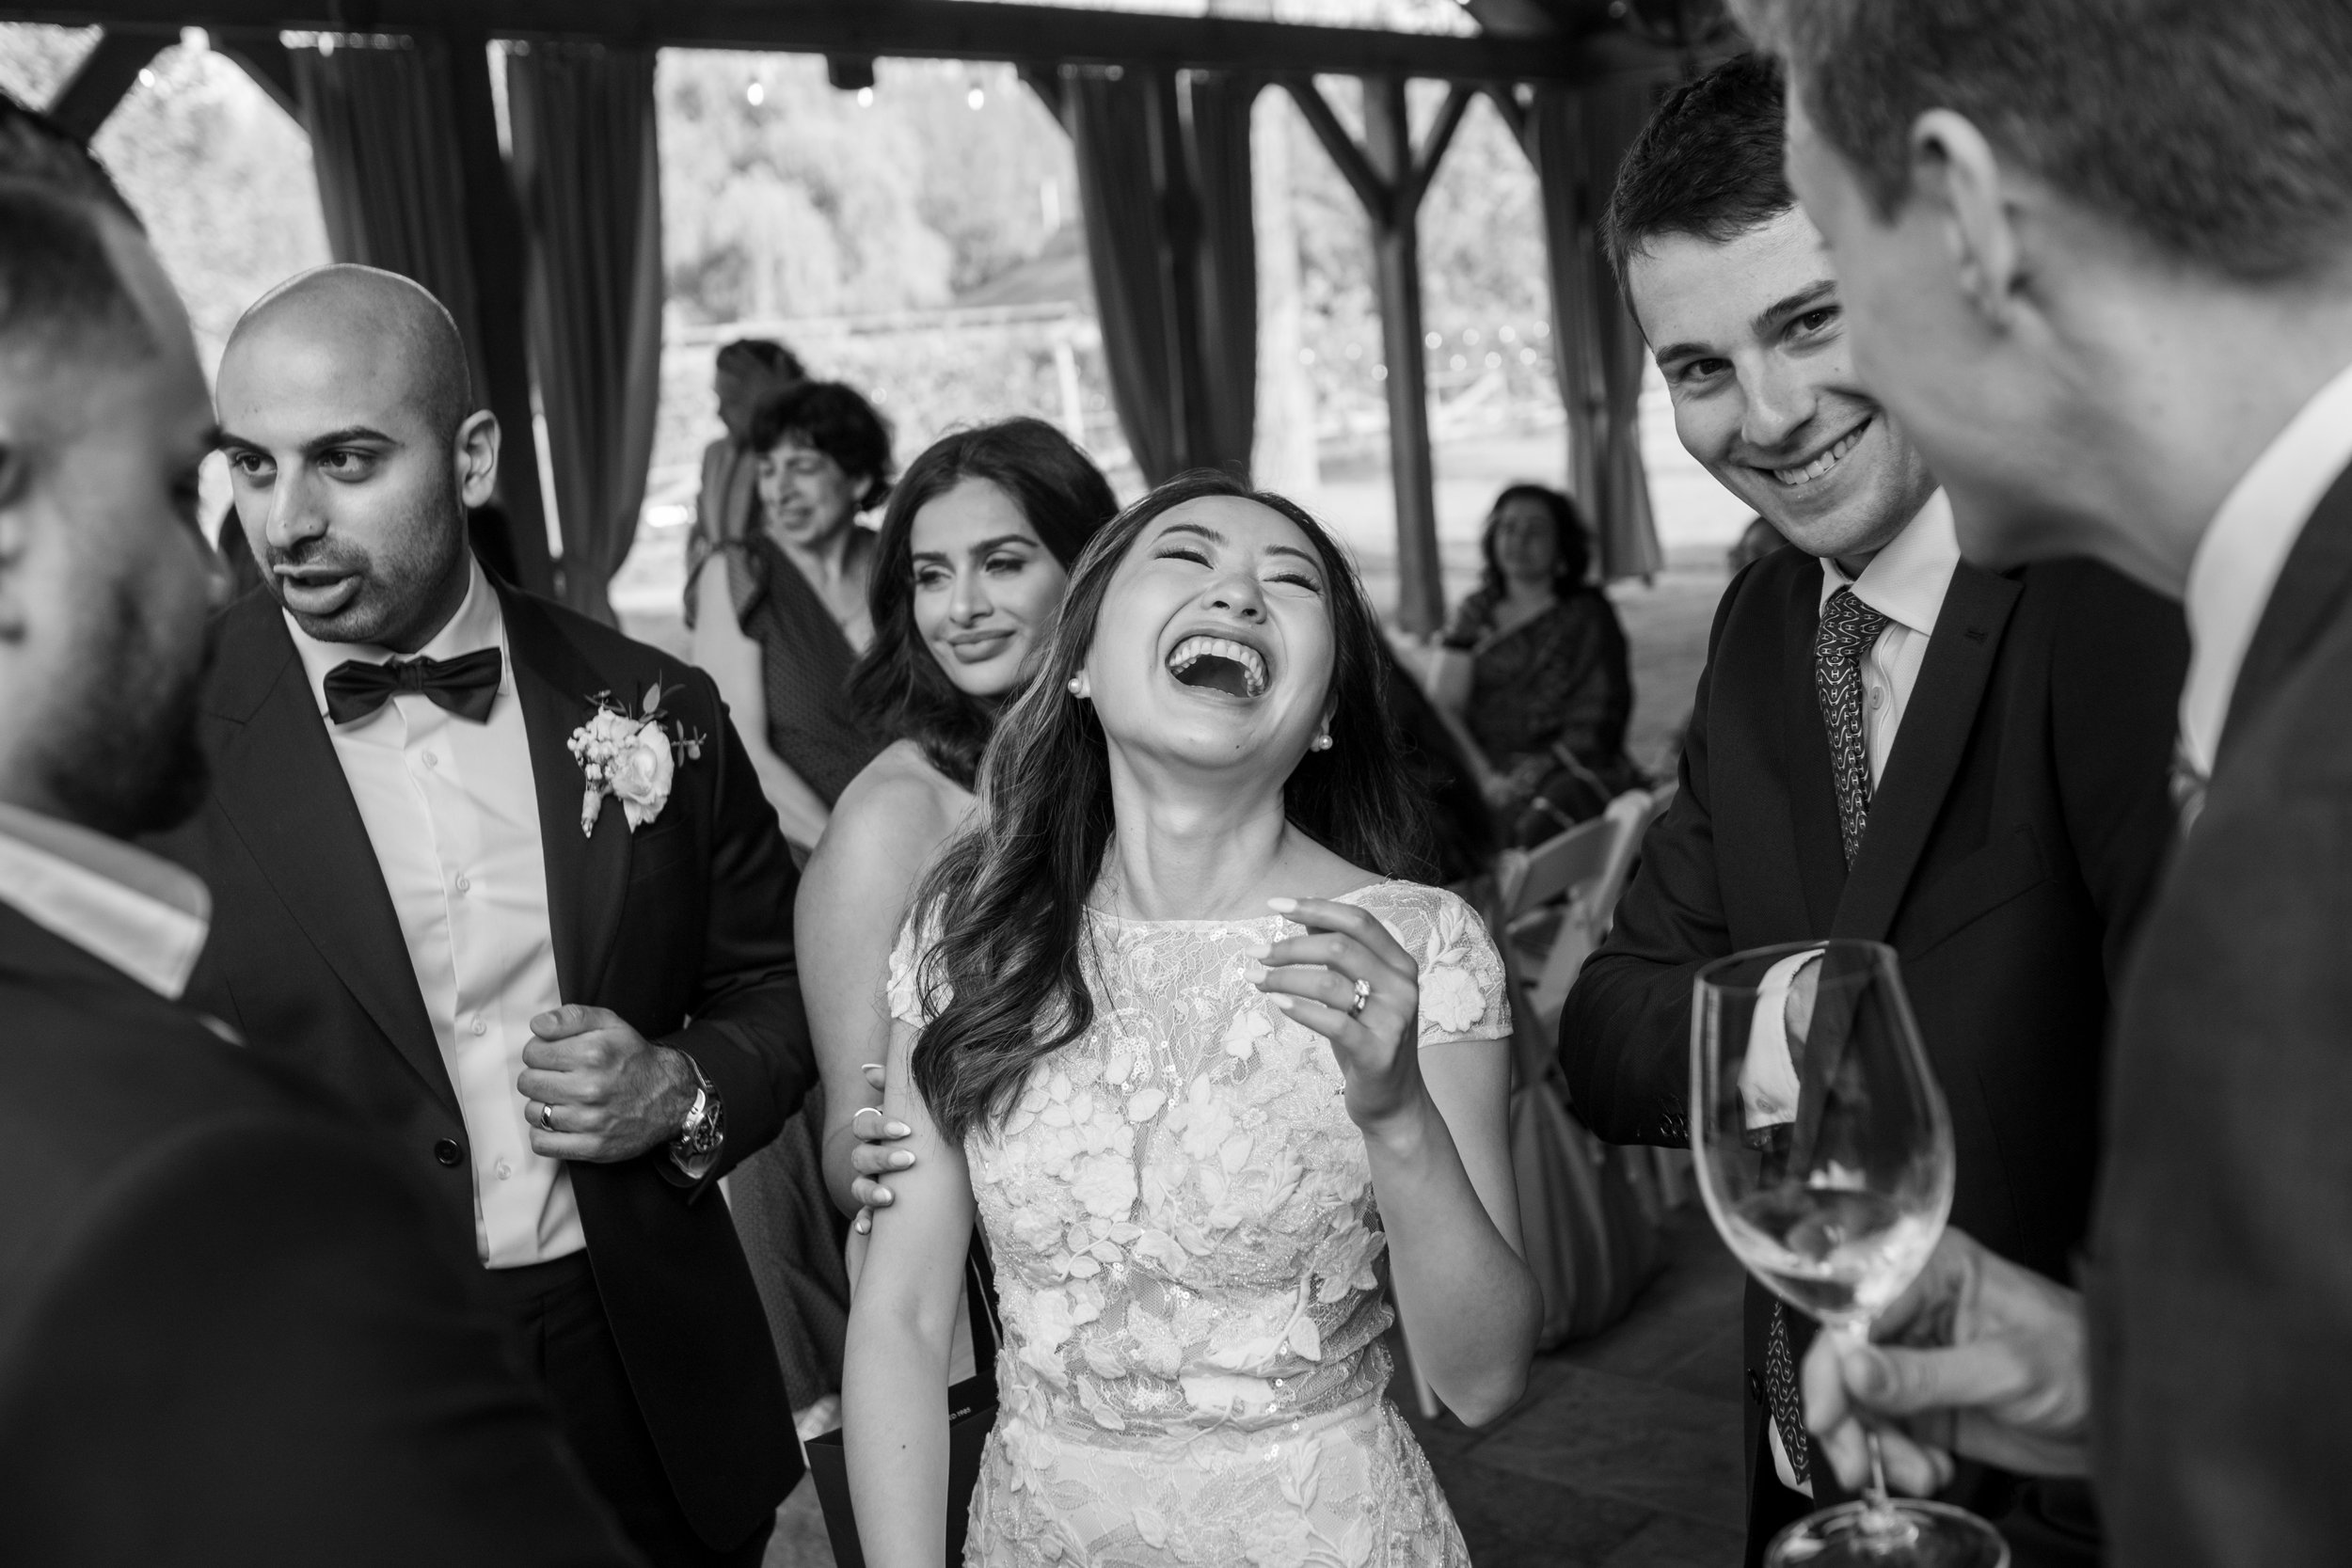  A black and white candid wedding photograph of Tiffany laughing during cocktail hour Tiffany + Zoubin’s wedding at Langdon Hall by Toronto Wedding Photographer Scott Williams  